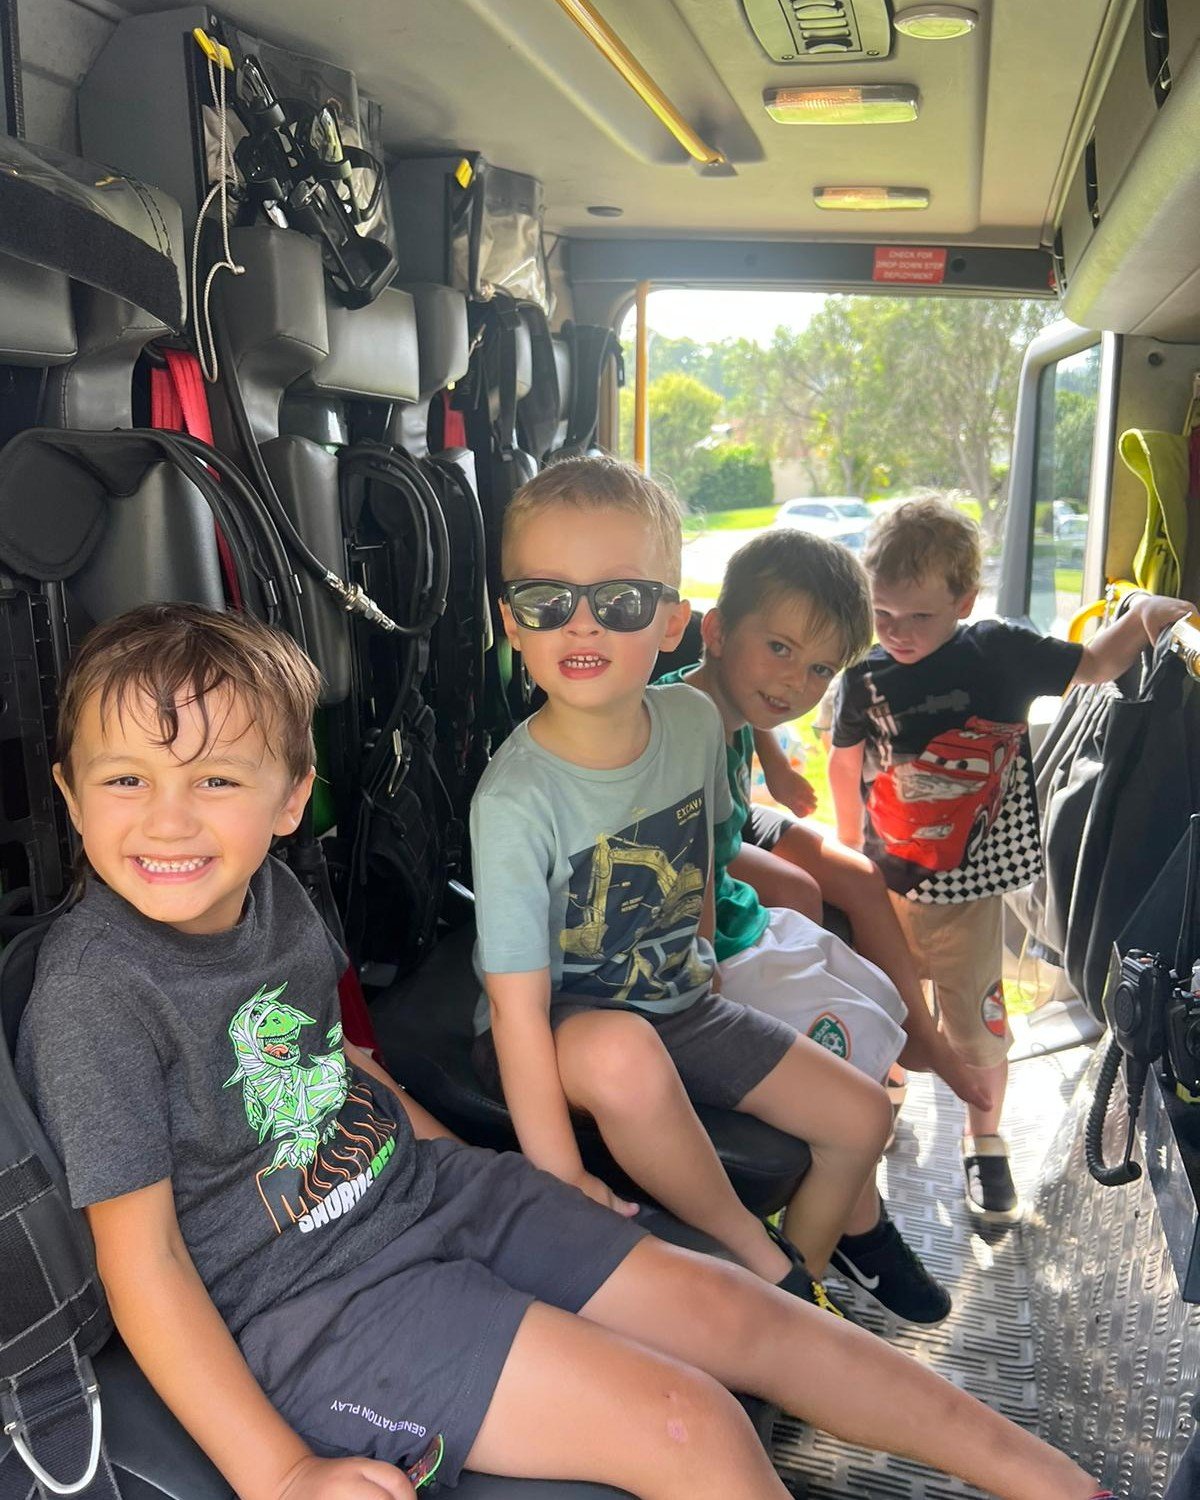 Our Albion Park children had the wonderful opportunity to learn about fire safety from the heroes of our local @fireandrescuensw Albion Park!

Not only did we get to sit in a real fire truck, but we also learned valuable lessons on staying safe. A bi